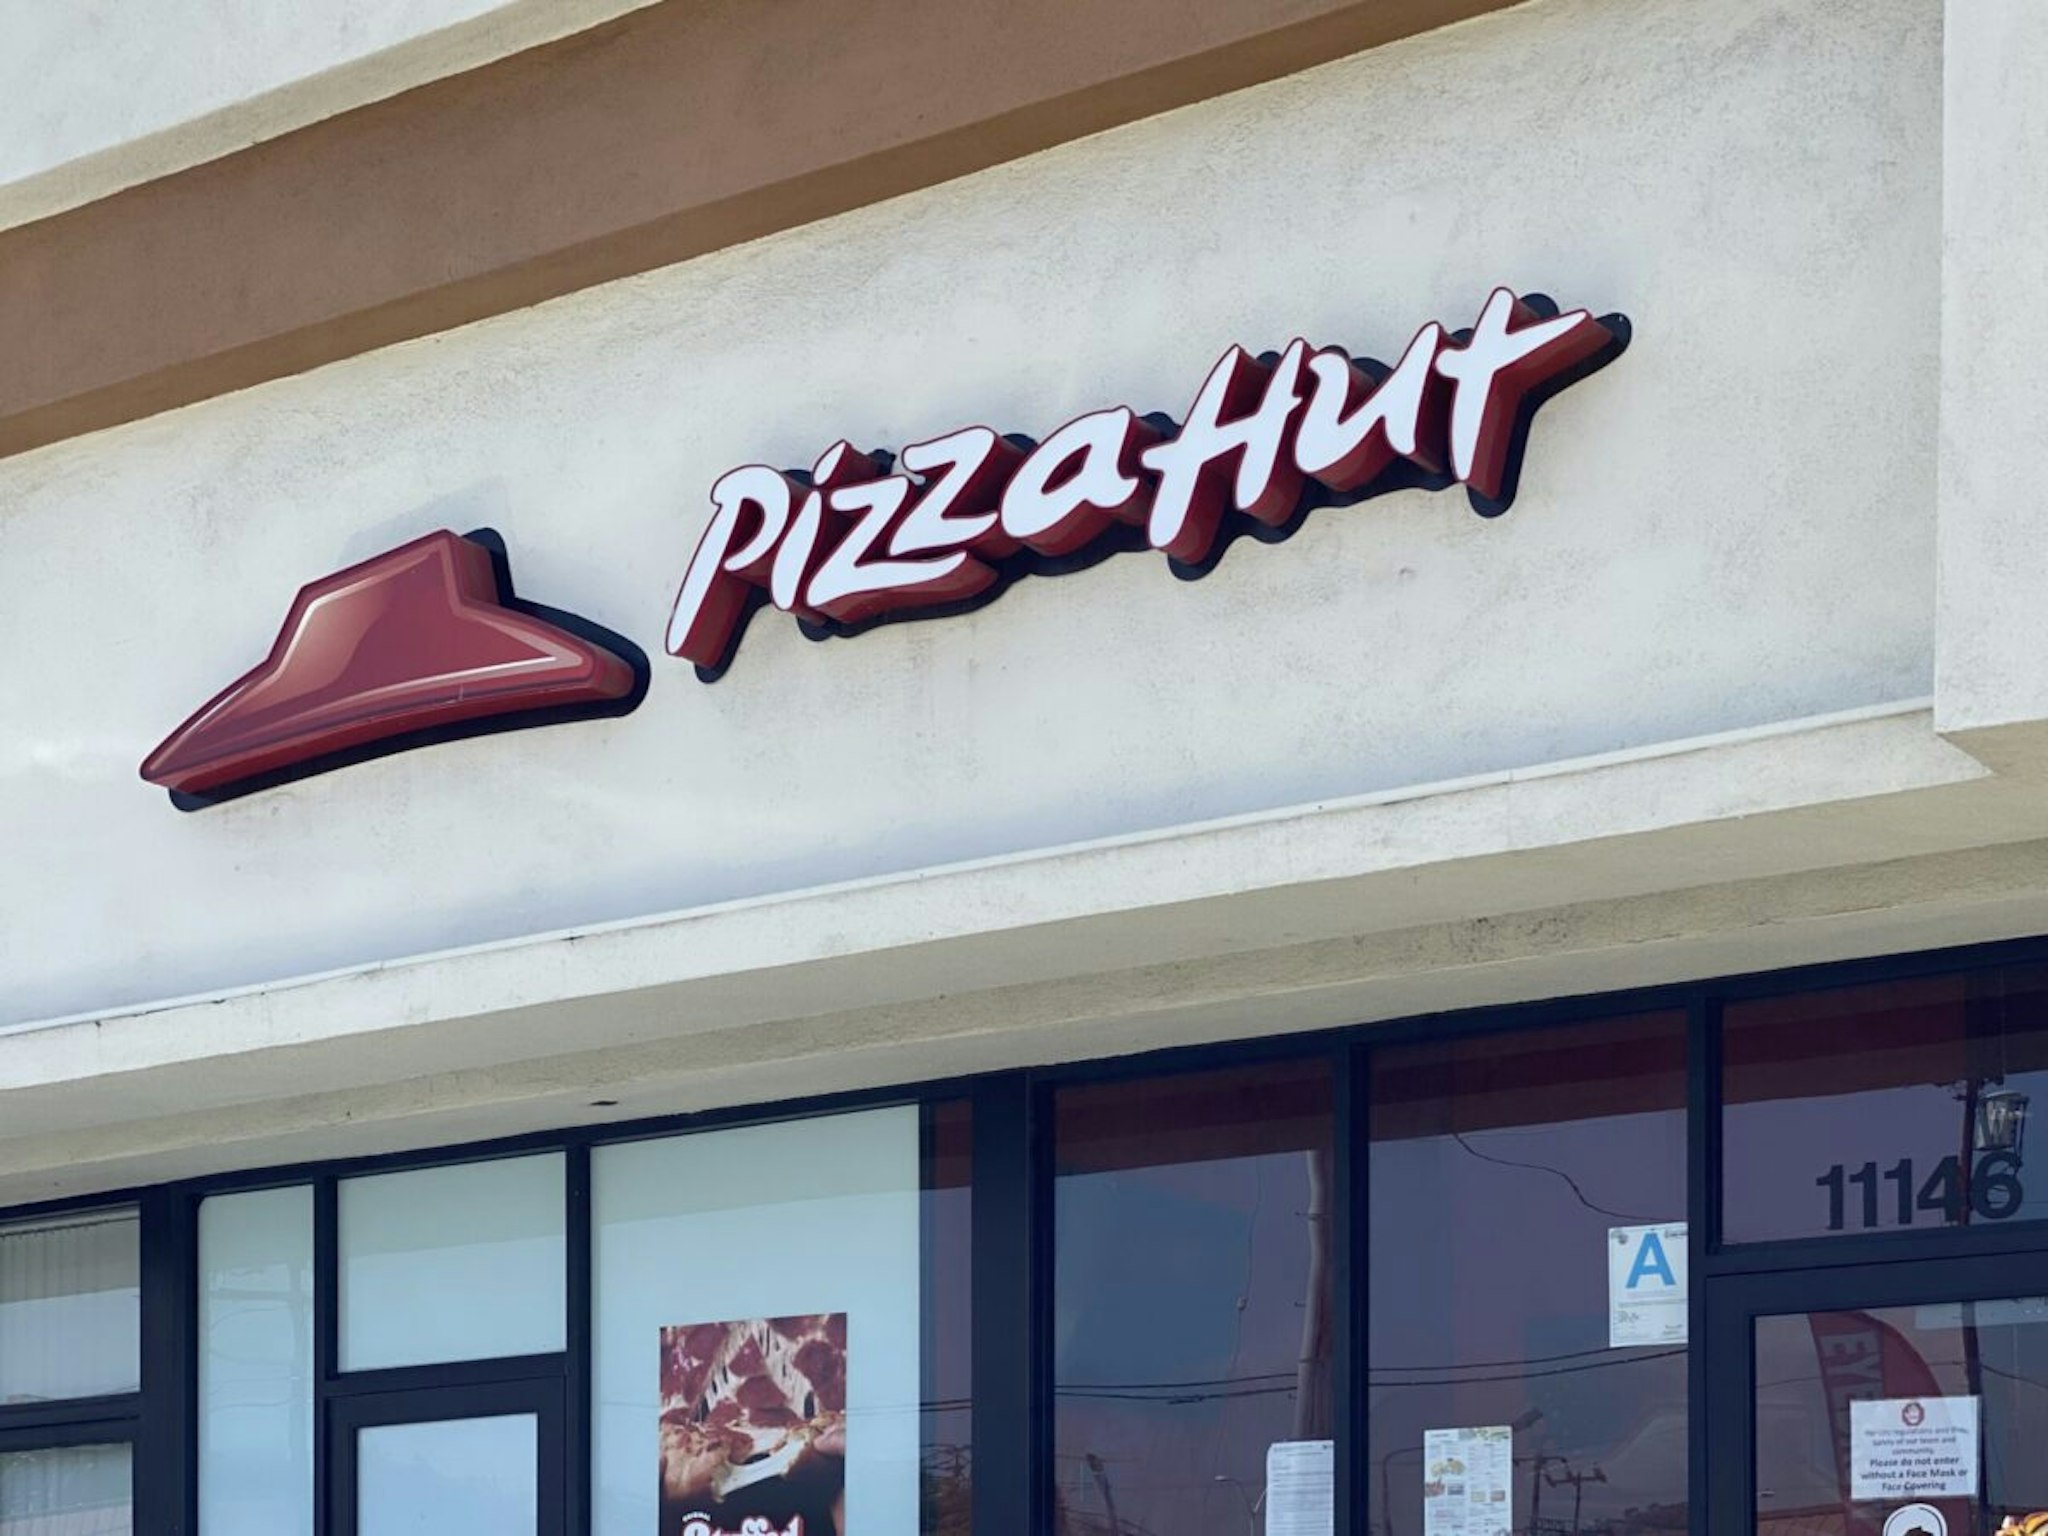 A Pizza Hut restaurant is seen in Los Angeles in July 2, 2020. - NPC International Inc, the largest franchisee of Pizza Hut restaurants in the US, filed for bankruptcy after coronavirus-related shutdowns added to competitive pressures in the restaurant industry. The closely held company sought Chapter 11 protection in the Southern District of Texas court on July 1, 2020. NPC, founded in 1962, operates 1,227 Pizza Hut and 393 Wendys stores across the US, according to court papers.